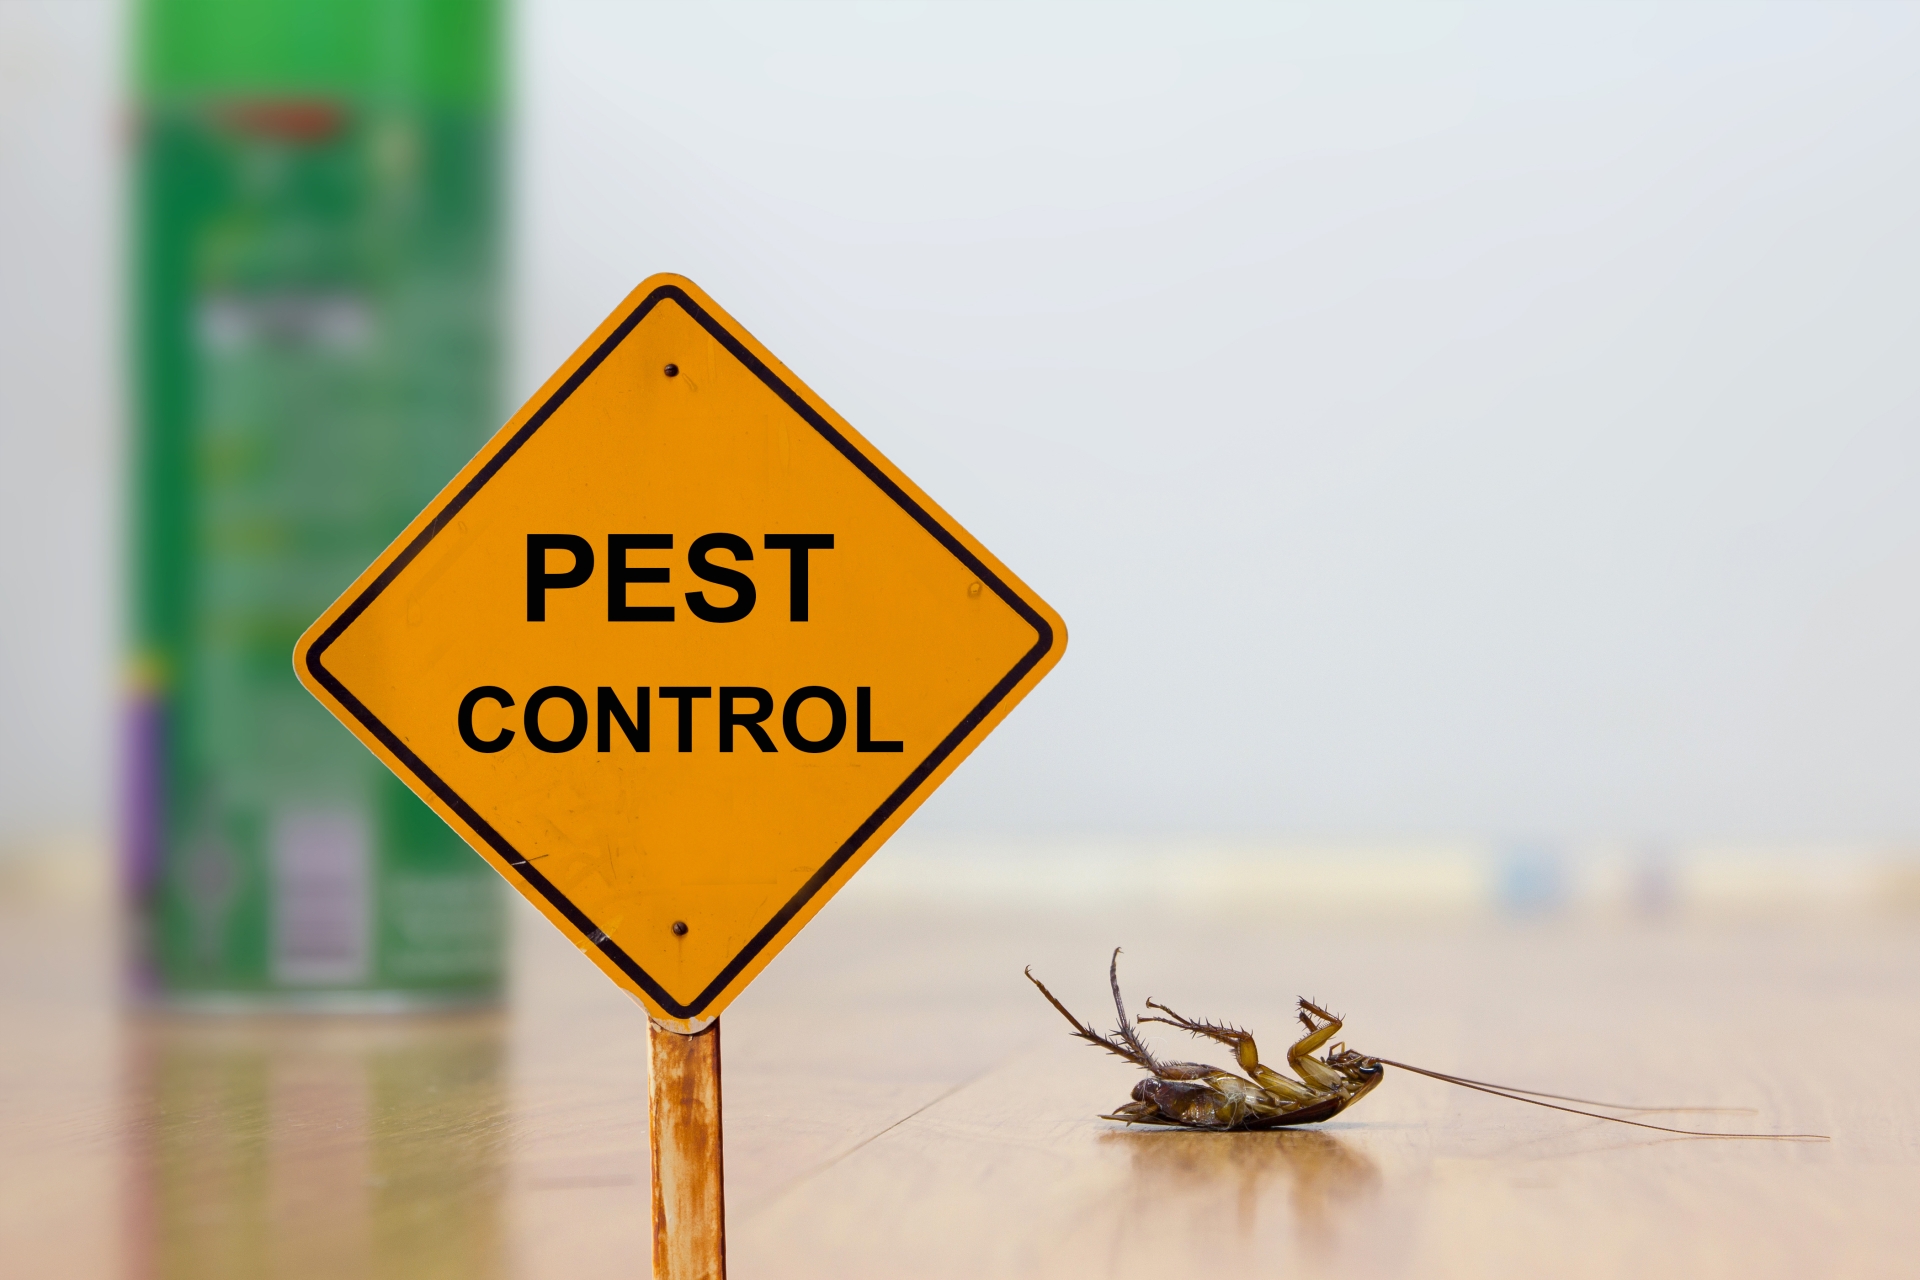 24 Hour Pest Control, Pest Control in Ewell, Stoneleigh, KT17. Call Now 020 8166 9746